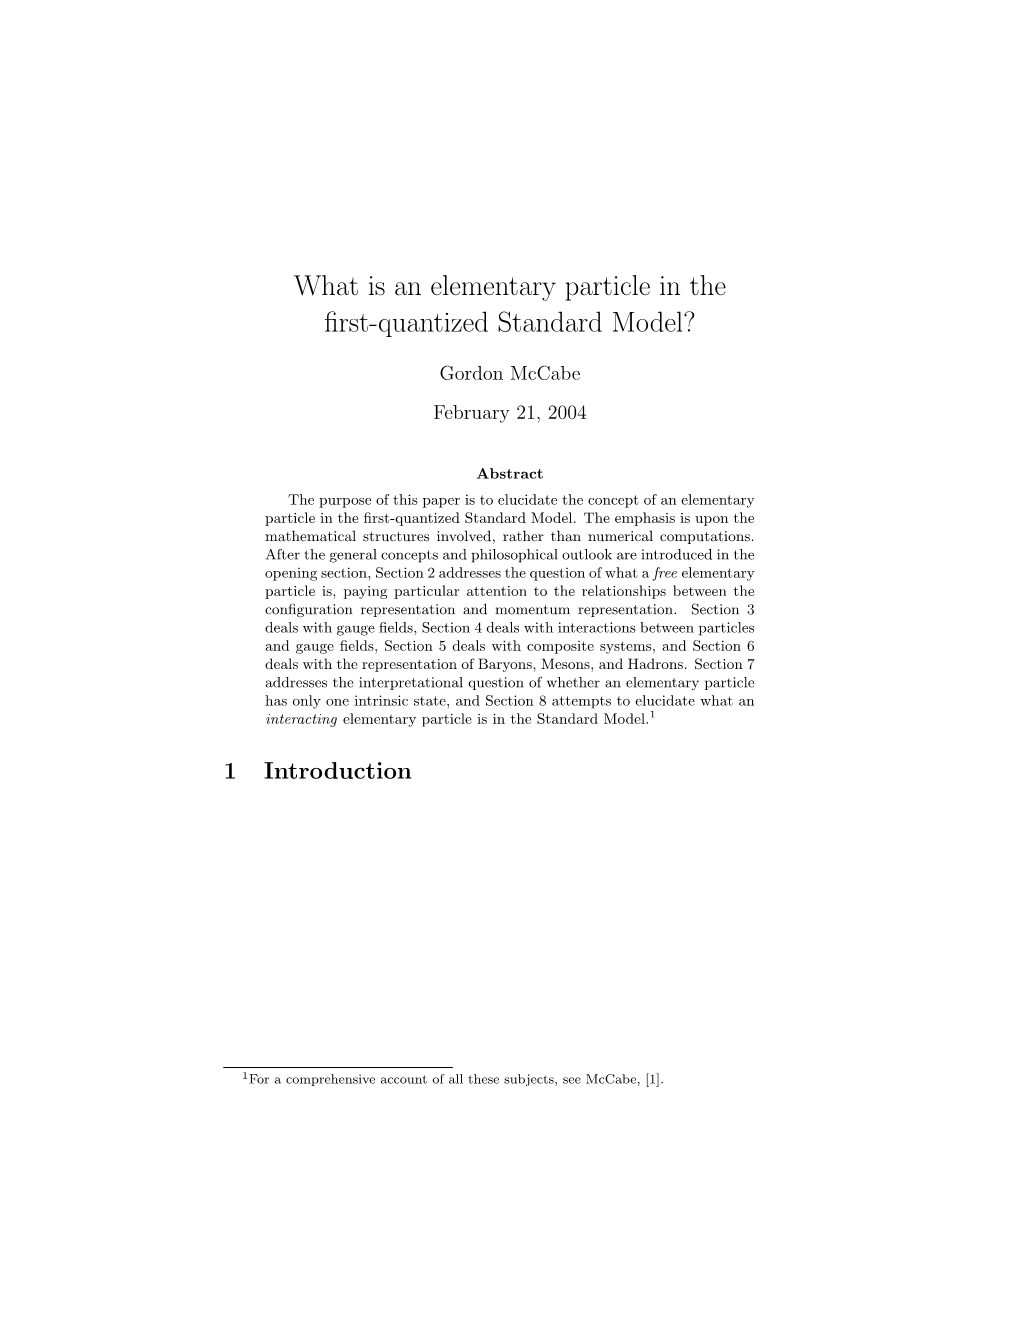 What Is an Elementary Particle in the First-Quantized Standard Model?